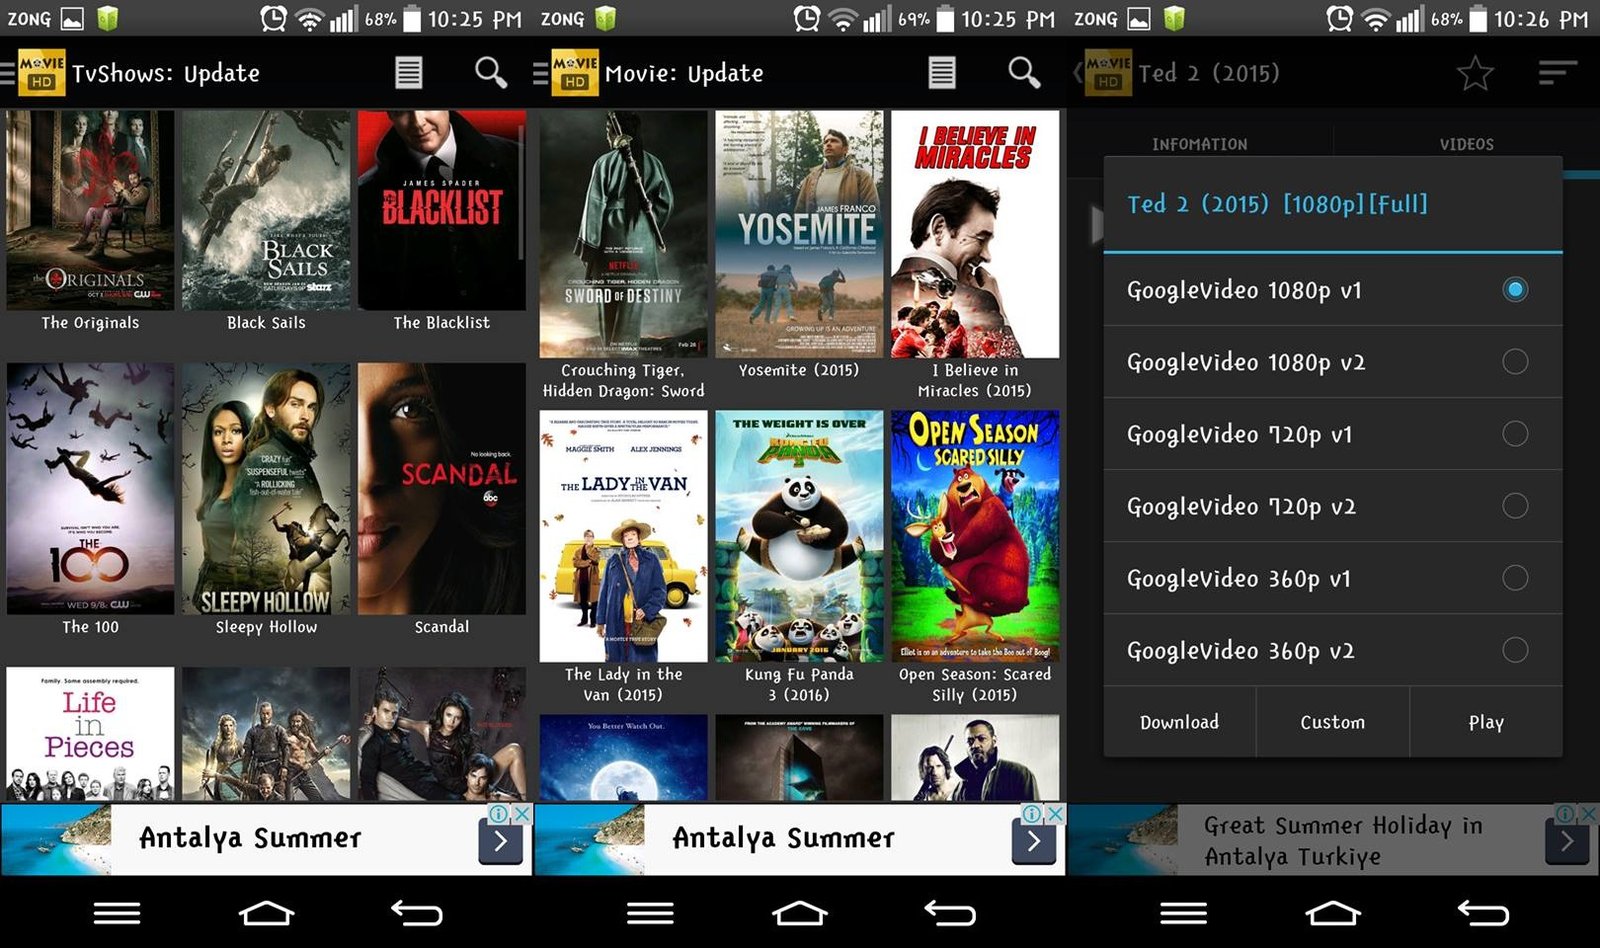 Download Movie HD Apk App Free for Movies, TVShowsAndroid Droidopinions